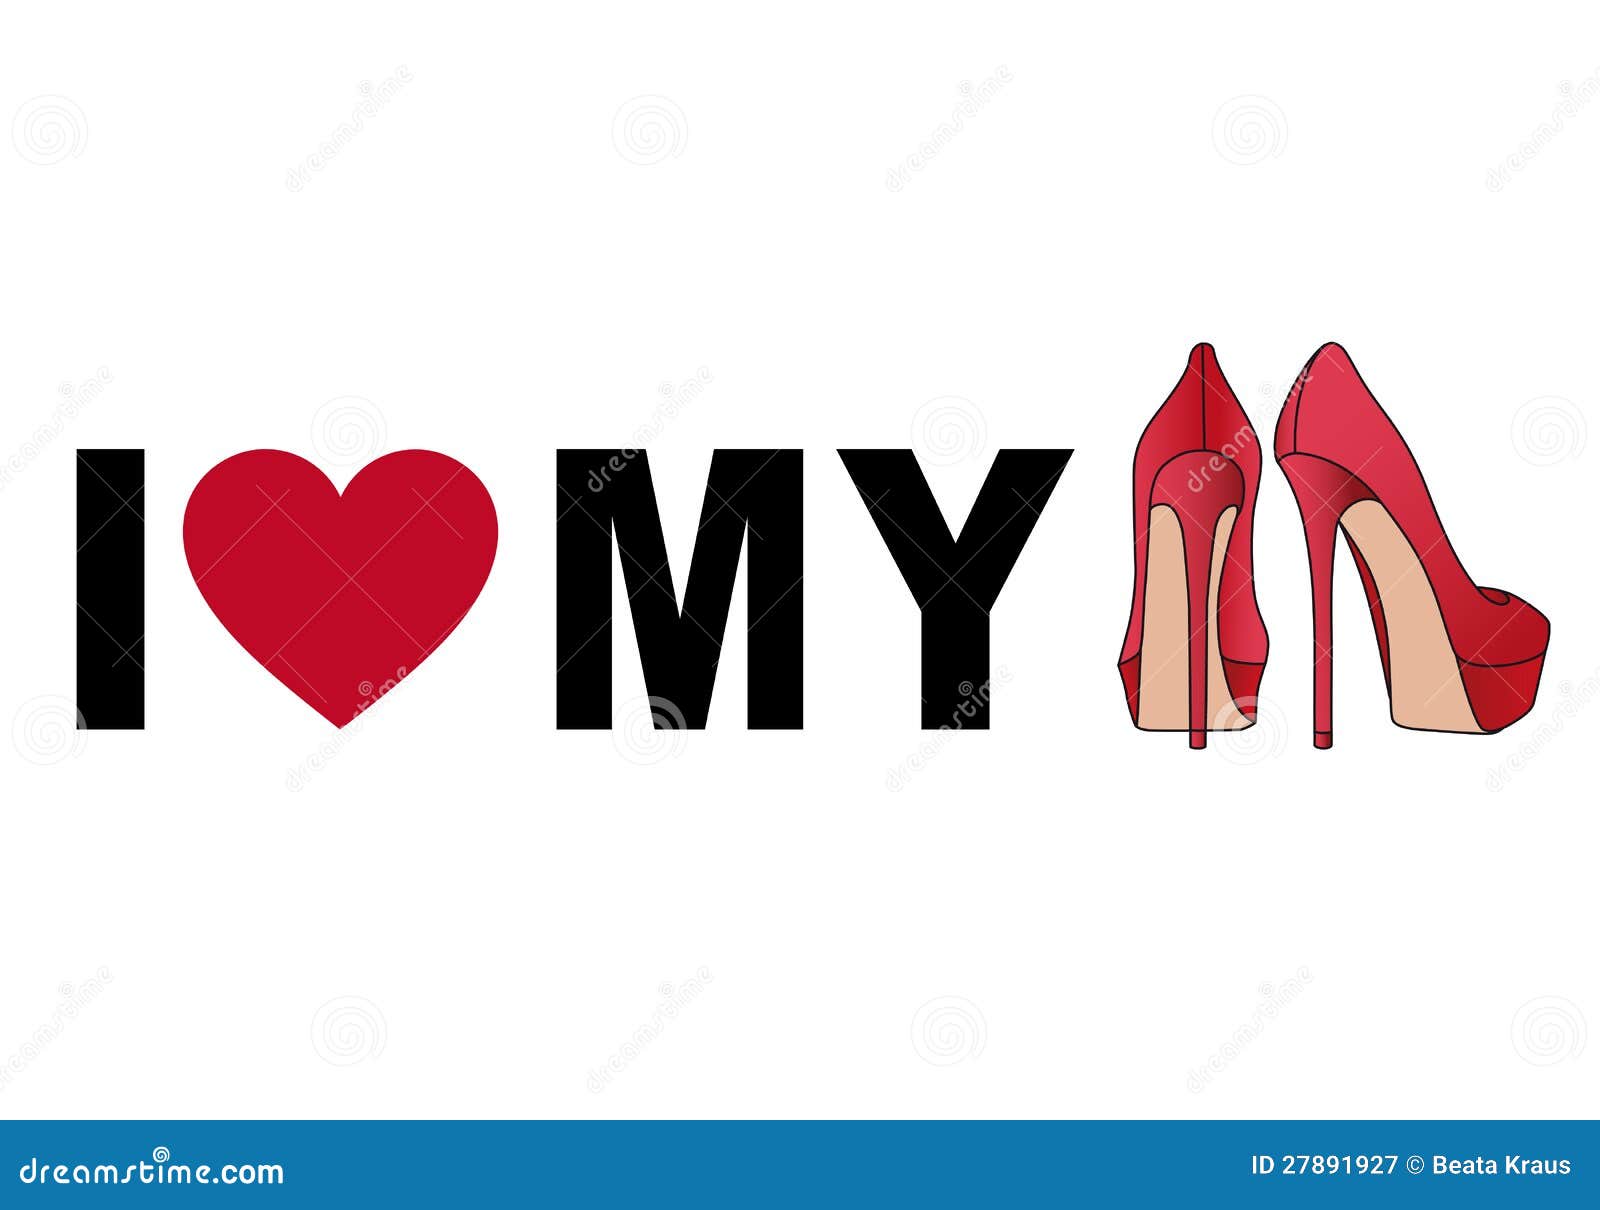 Love my shoes, vector stock vector. Illustration of passion - 27891927